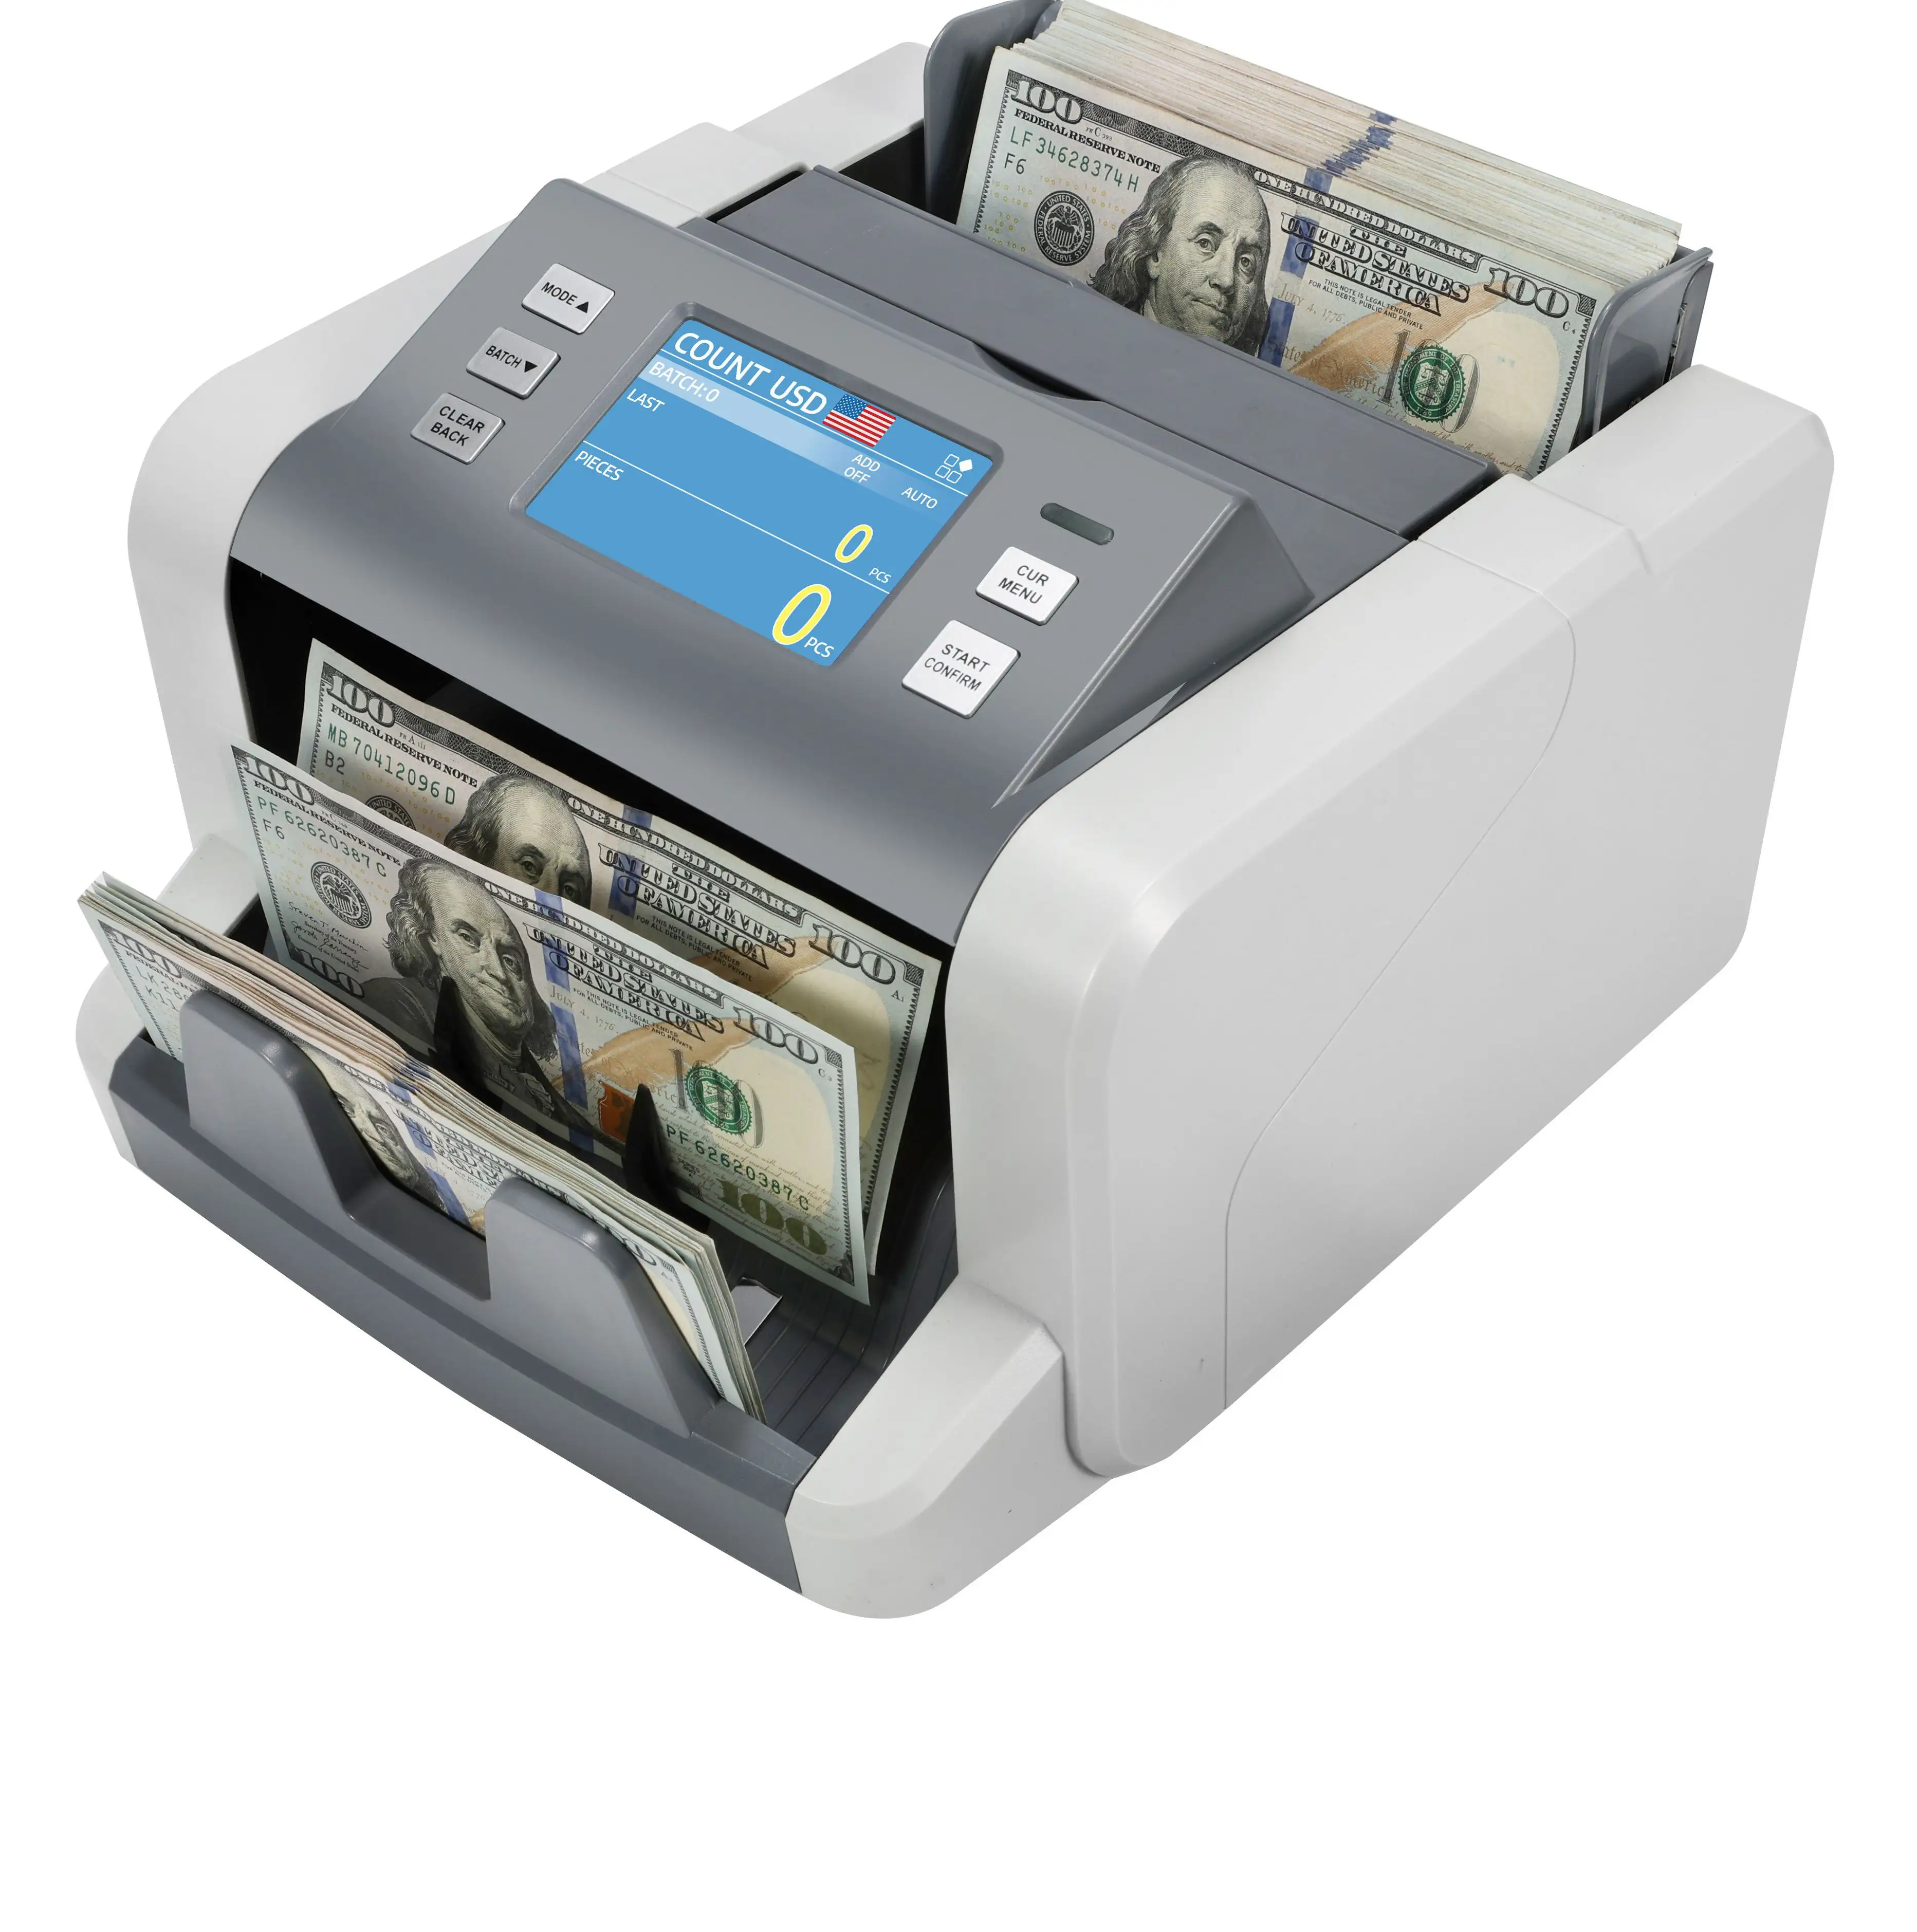 HL-80 mixed value counter with forged note detection/ cash counting/ money counter single CIS IR MG UV